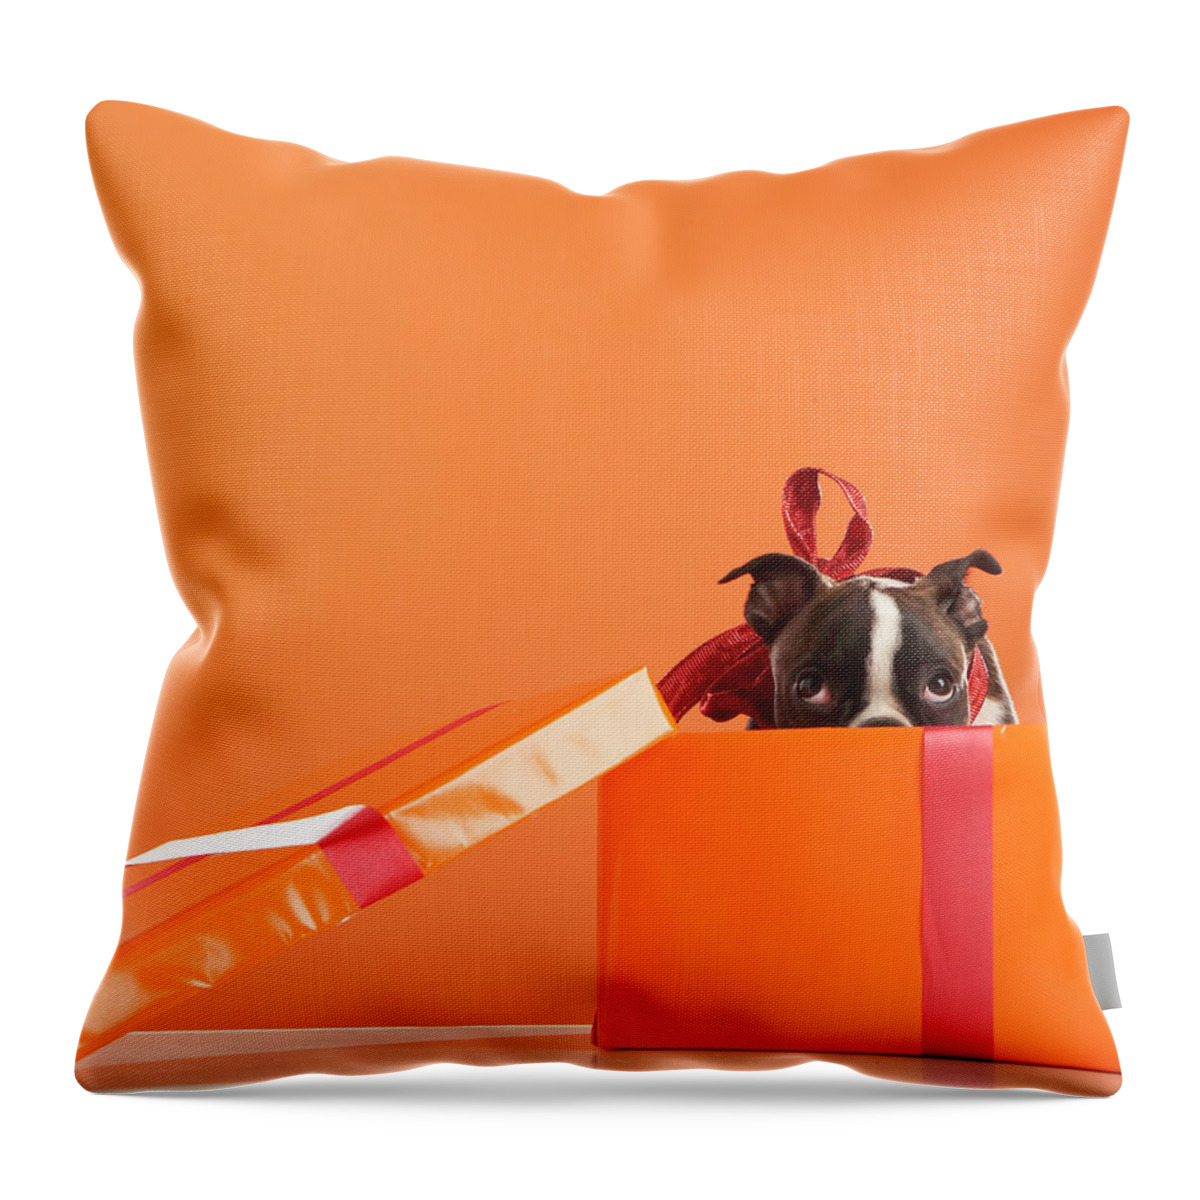 Pets Throw Pillow featuring the photograph Boston Terrier Puppy In Gift Box by Thomas Northcut